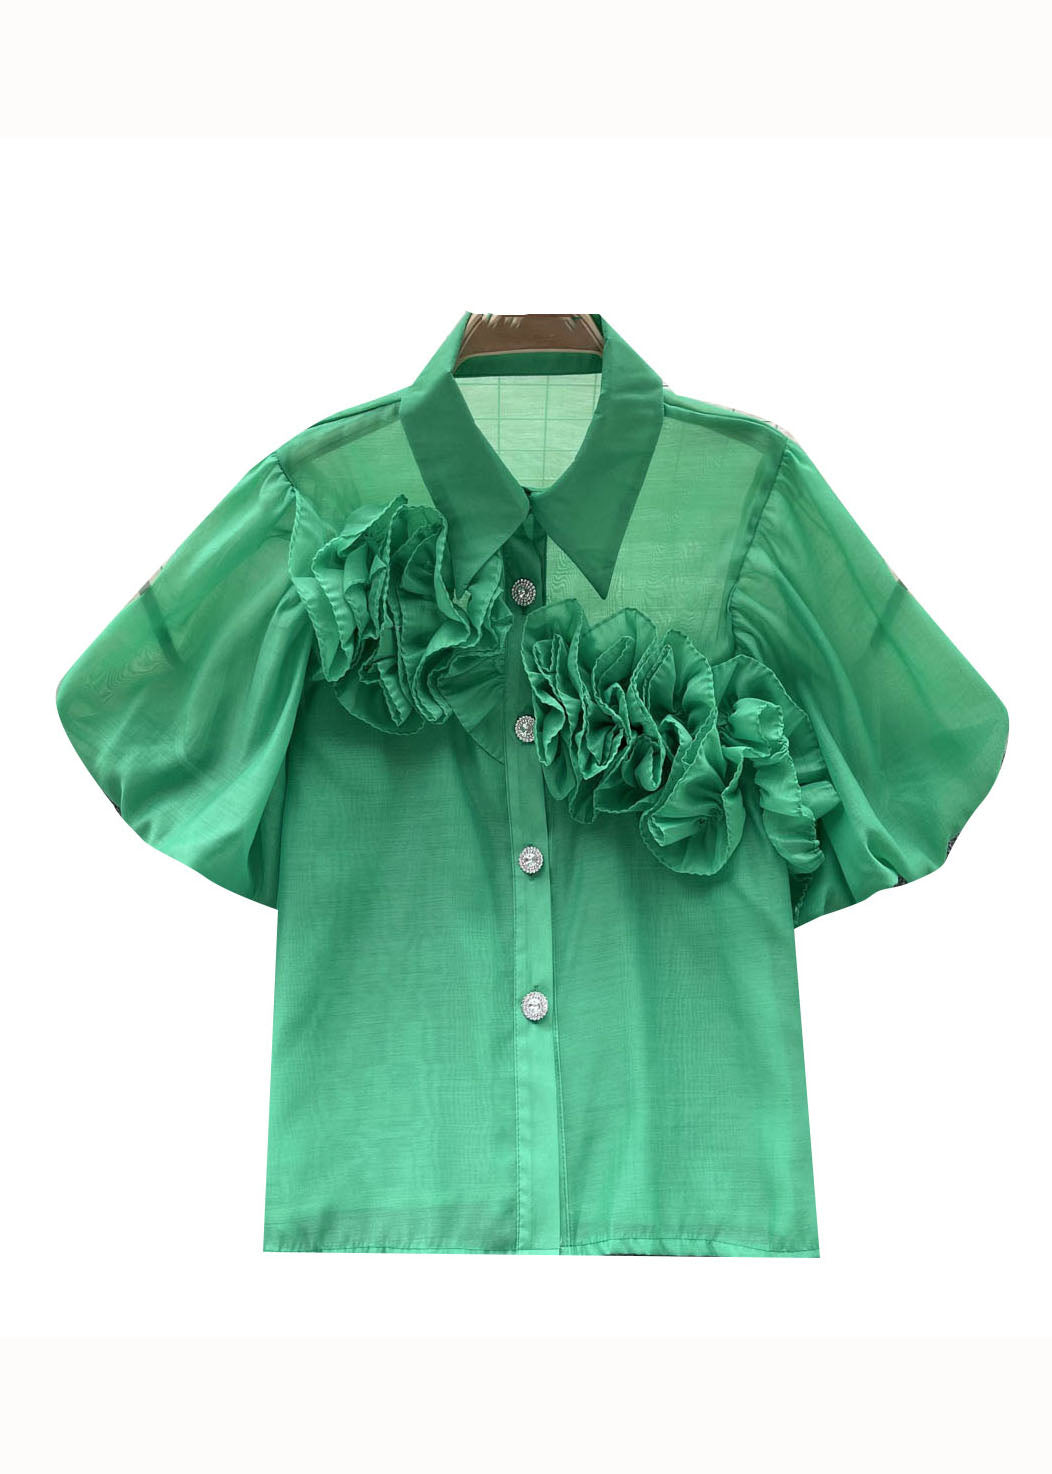 Style Green Peter Pan Collar Floral Patchwork Cotton Shirts Puff Sleeve